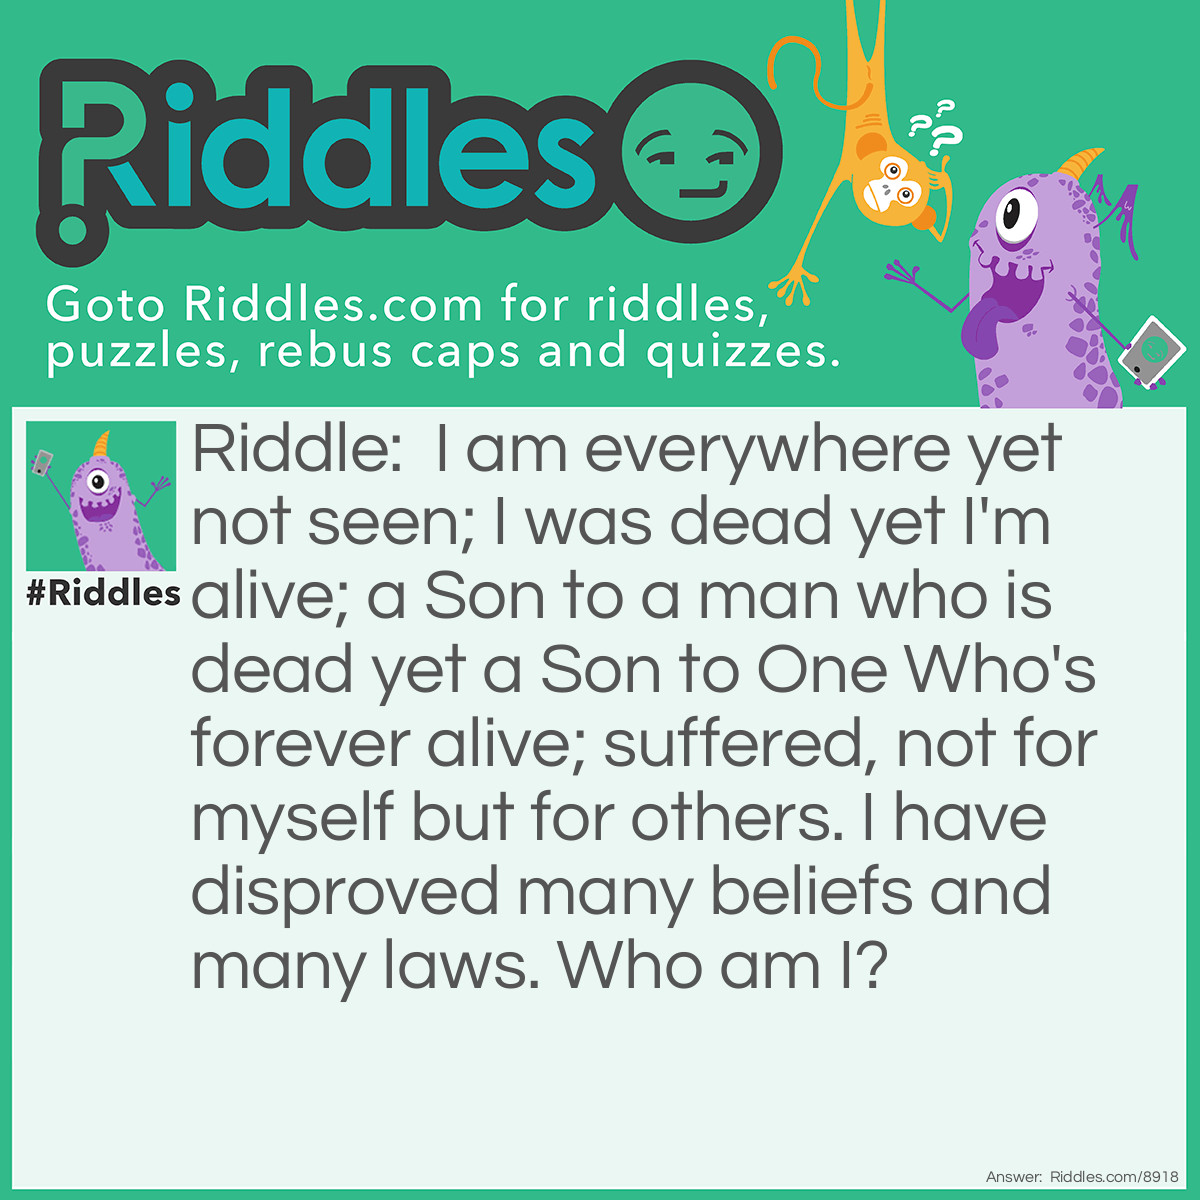 Riddle: I am everywhere yet not seen; I was dead yet I'm alive; a Son to a man who is dead yet a Son to One Who's forever alive; suffered, not for myself but for others. I have disproved many beliefs and many laws. Who am I? Answer: Jesus Christ.